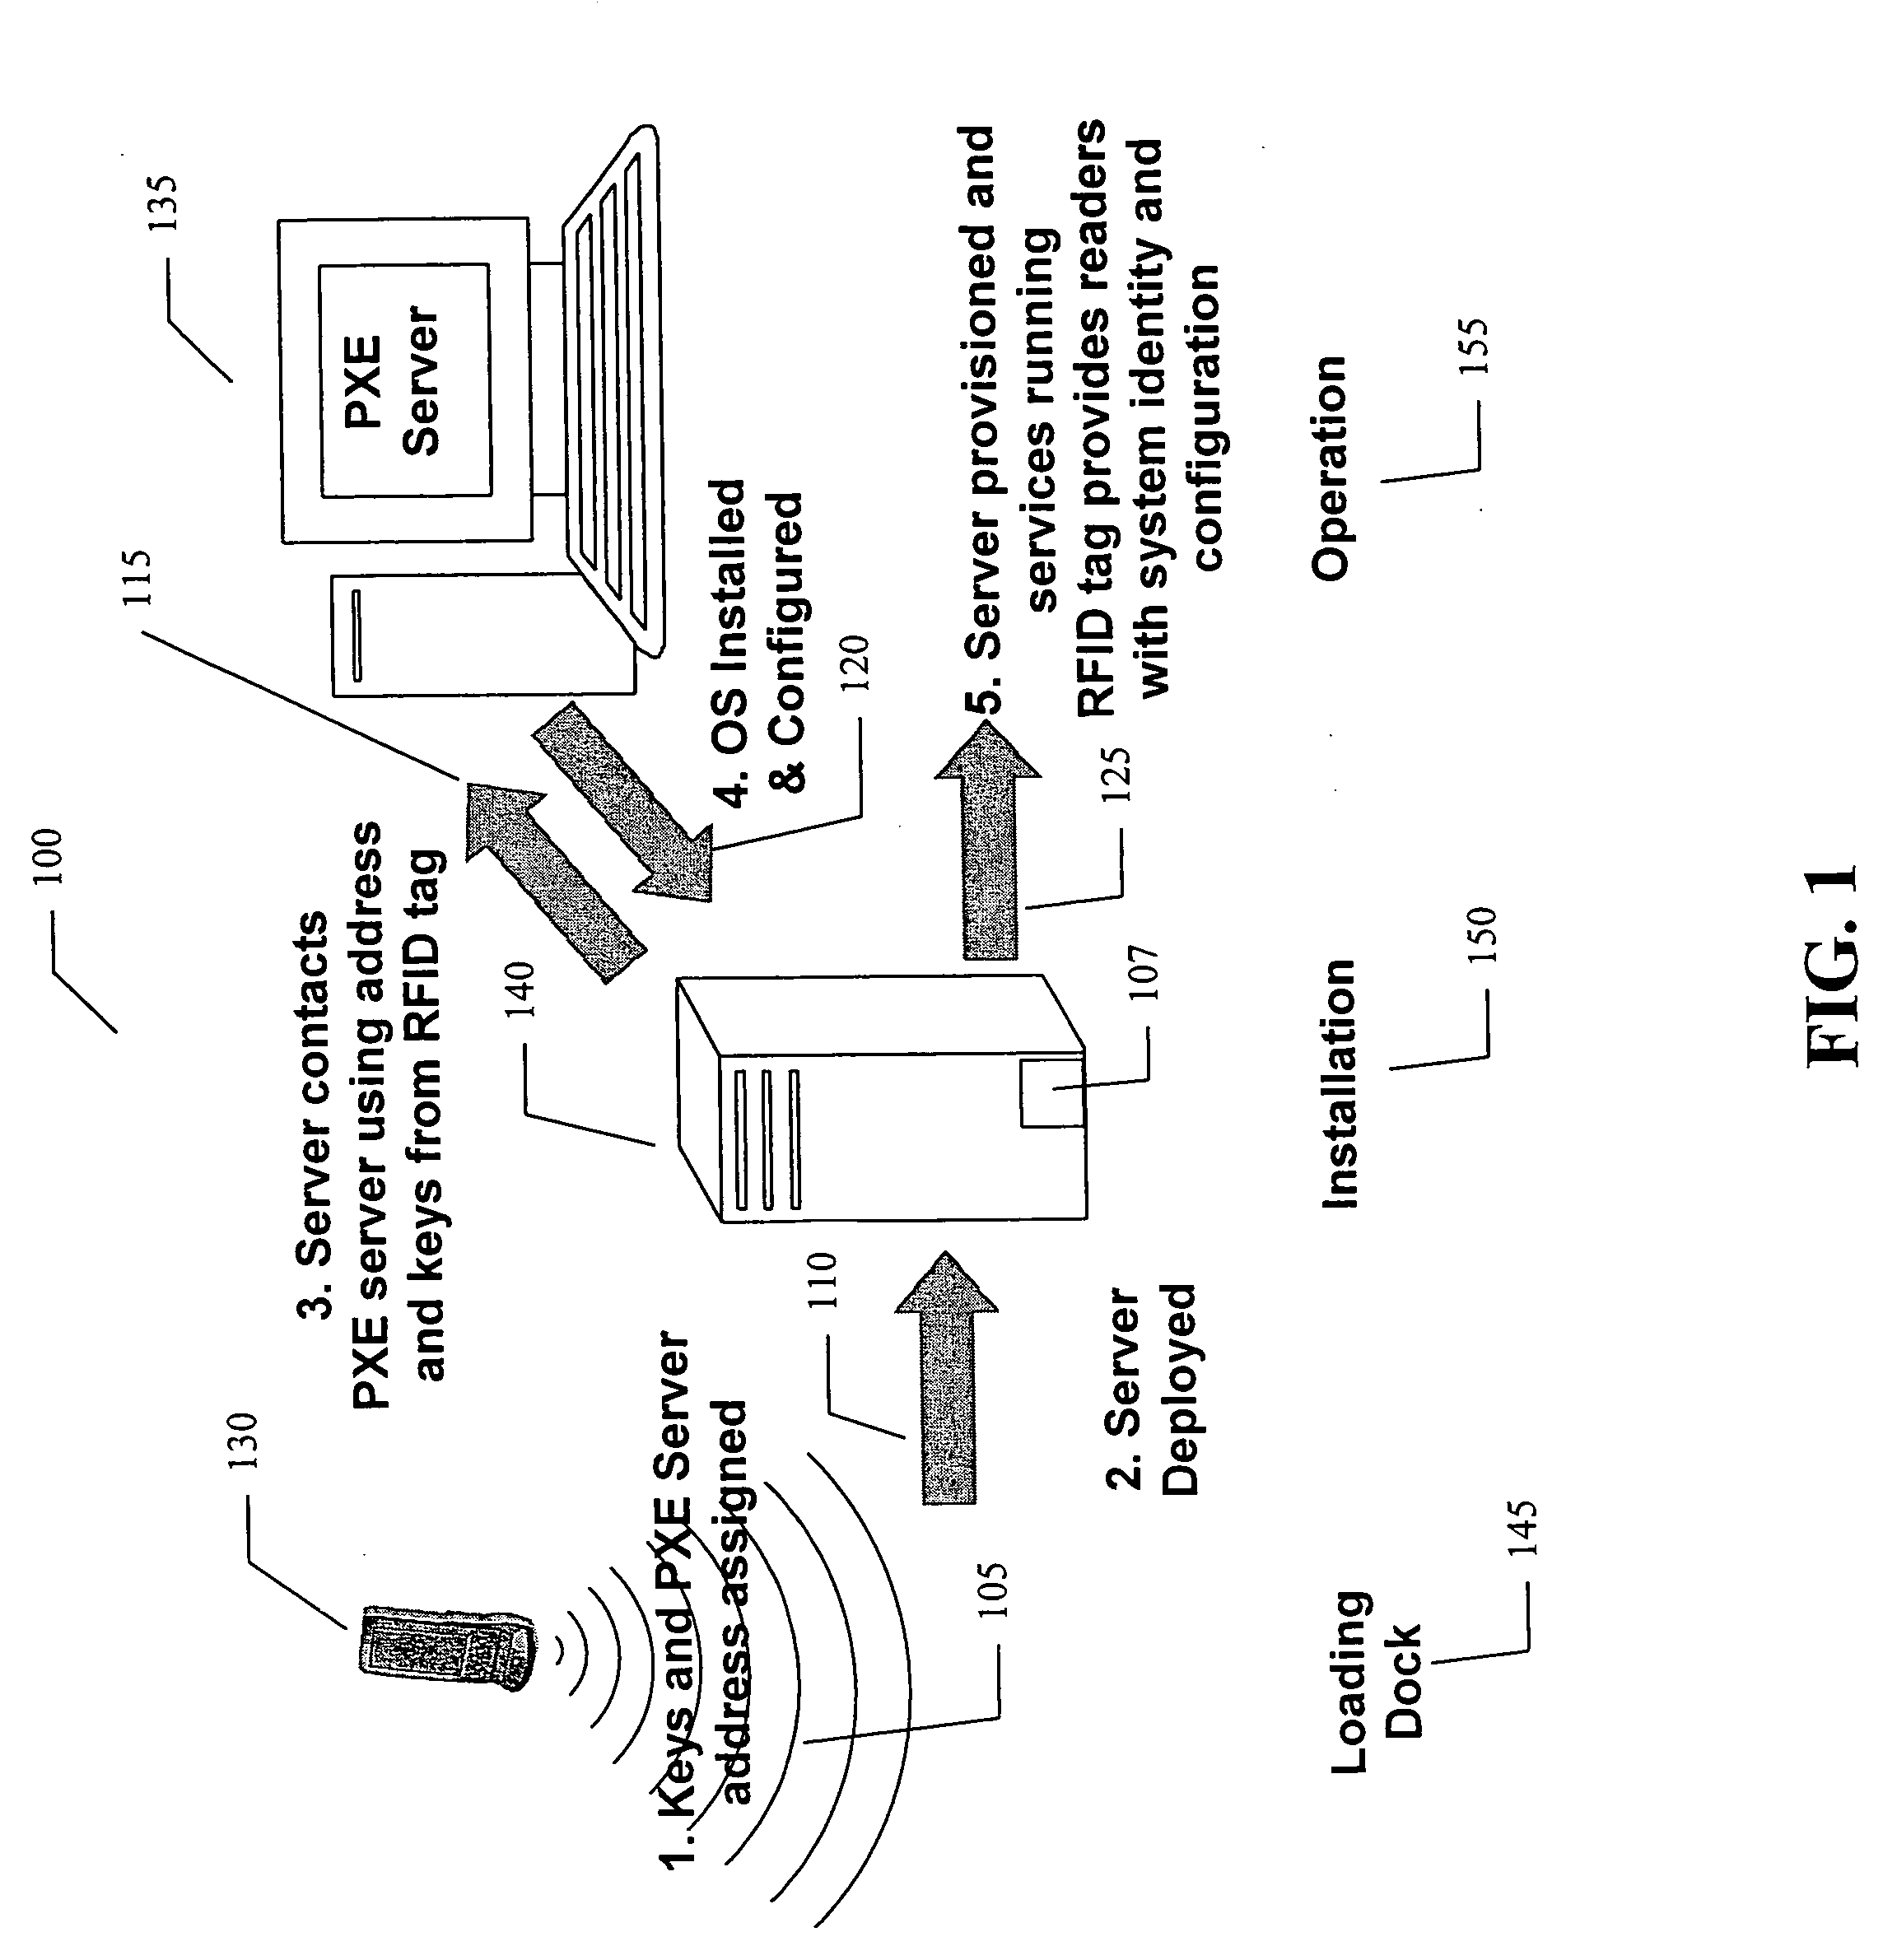 Apparatus and method capable of secure wireless configuration and provisioning